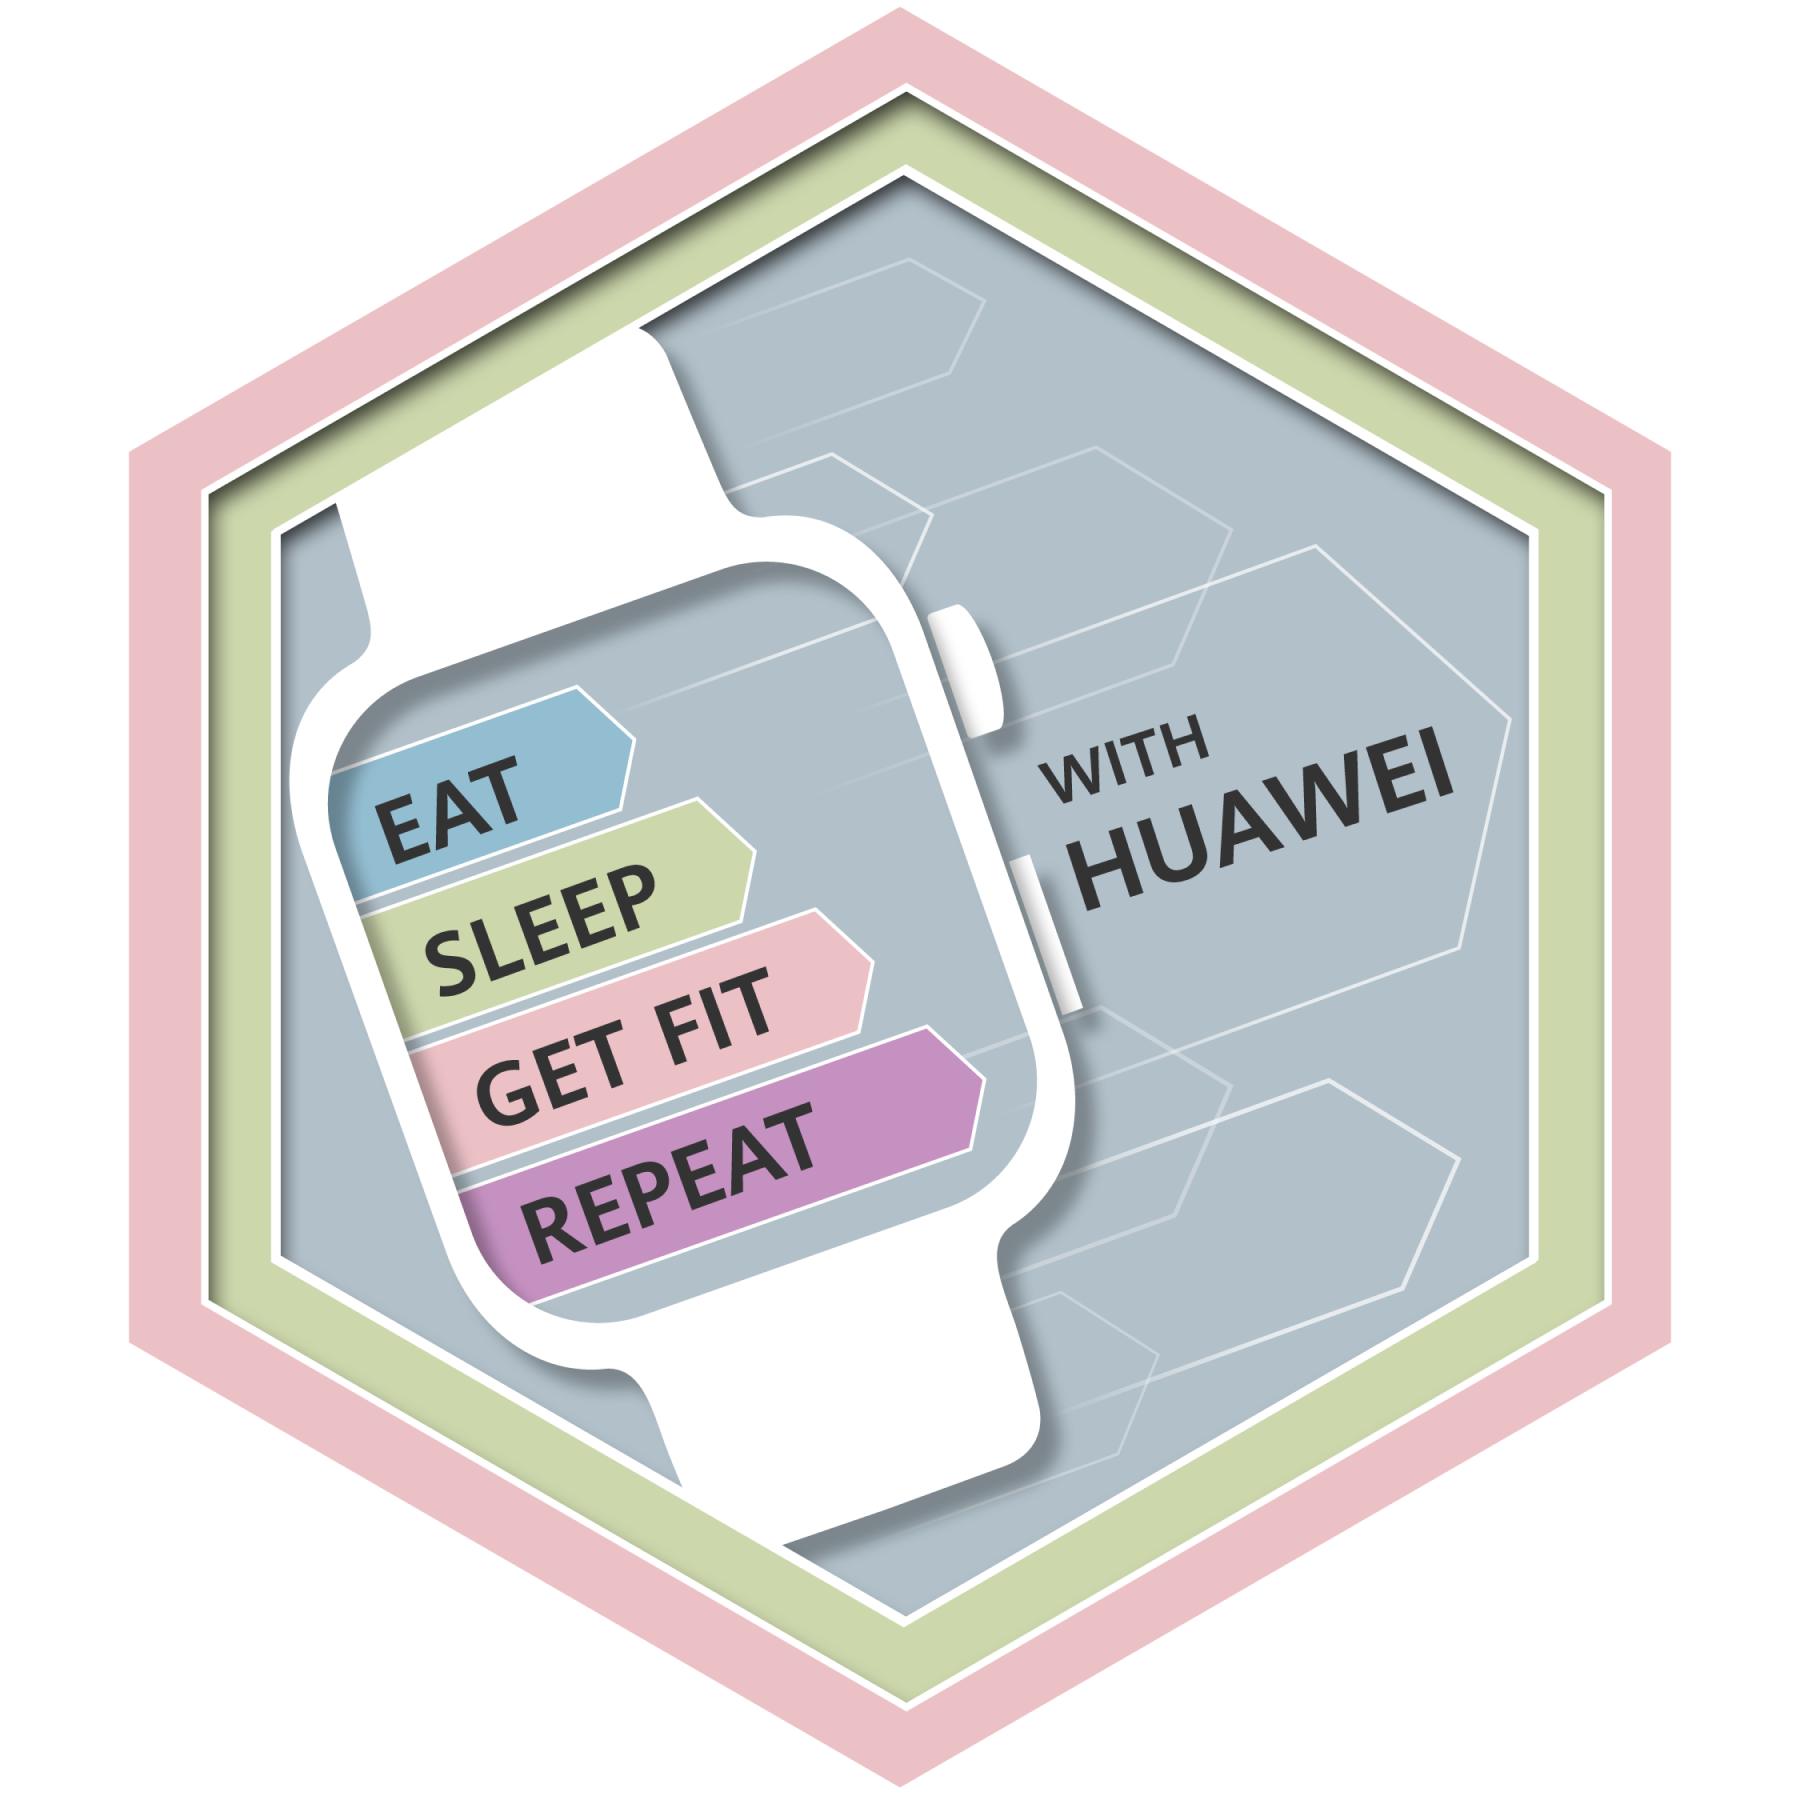 Eat, Sleep, Get FIT, Repeat with Huawei